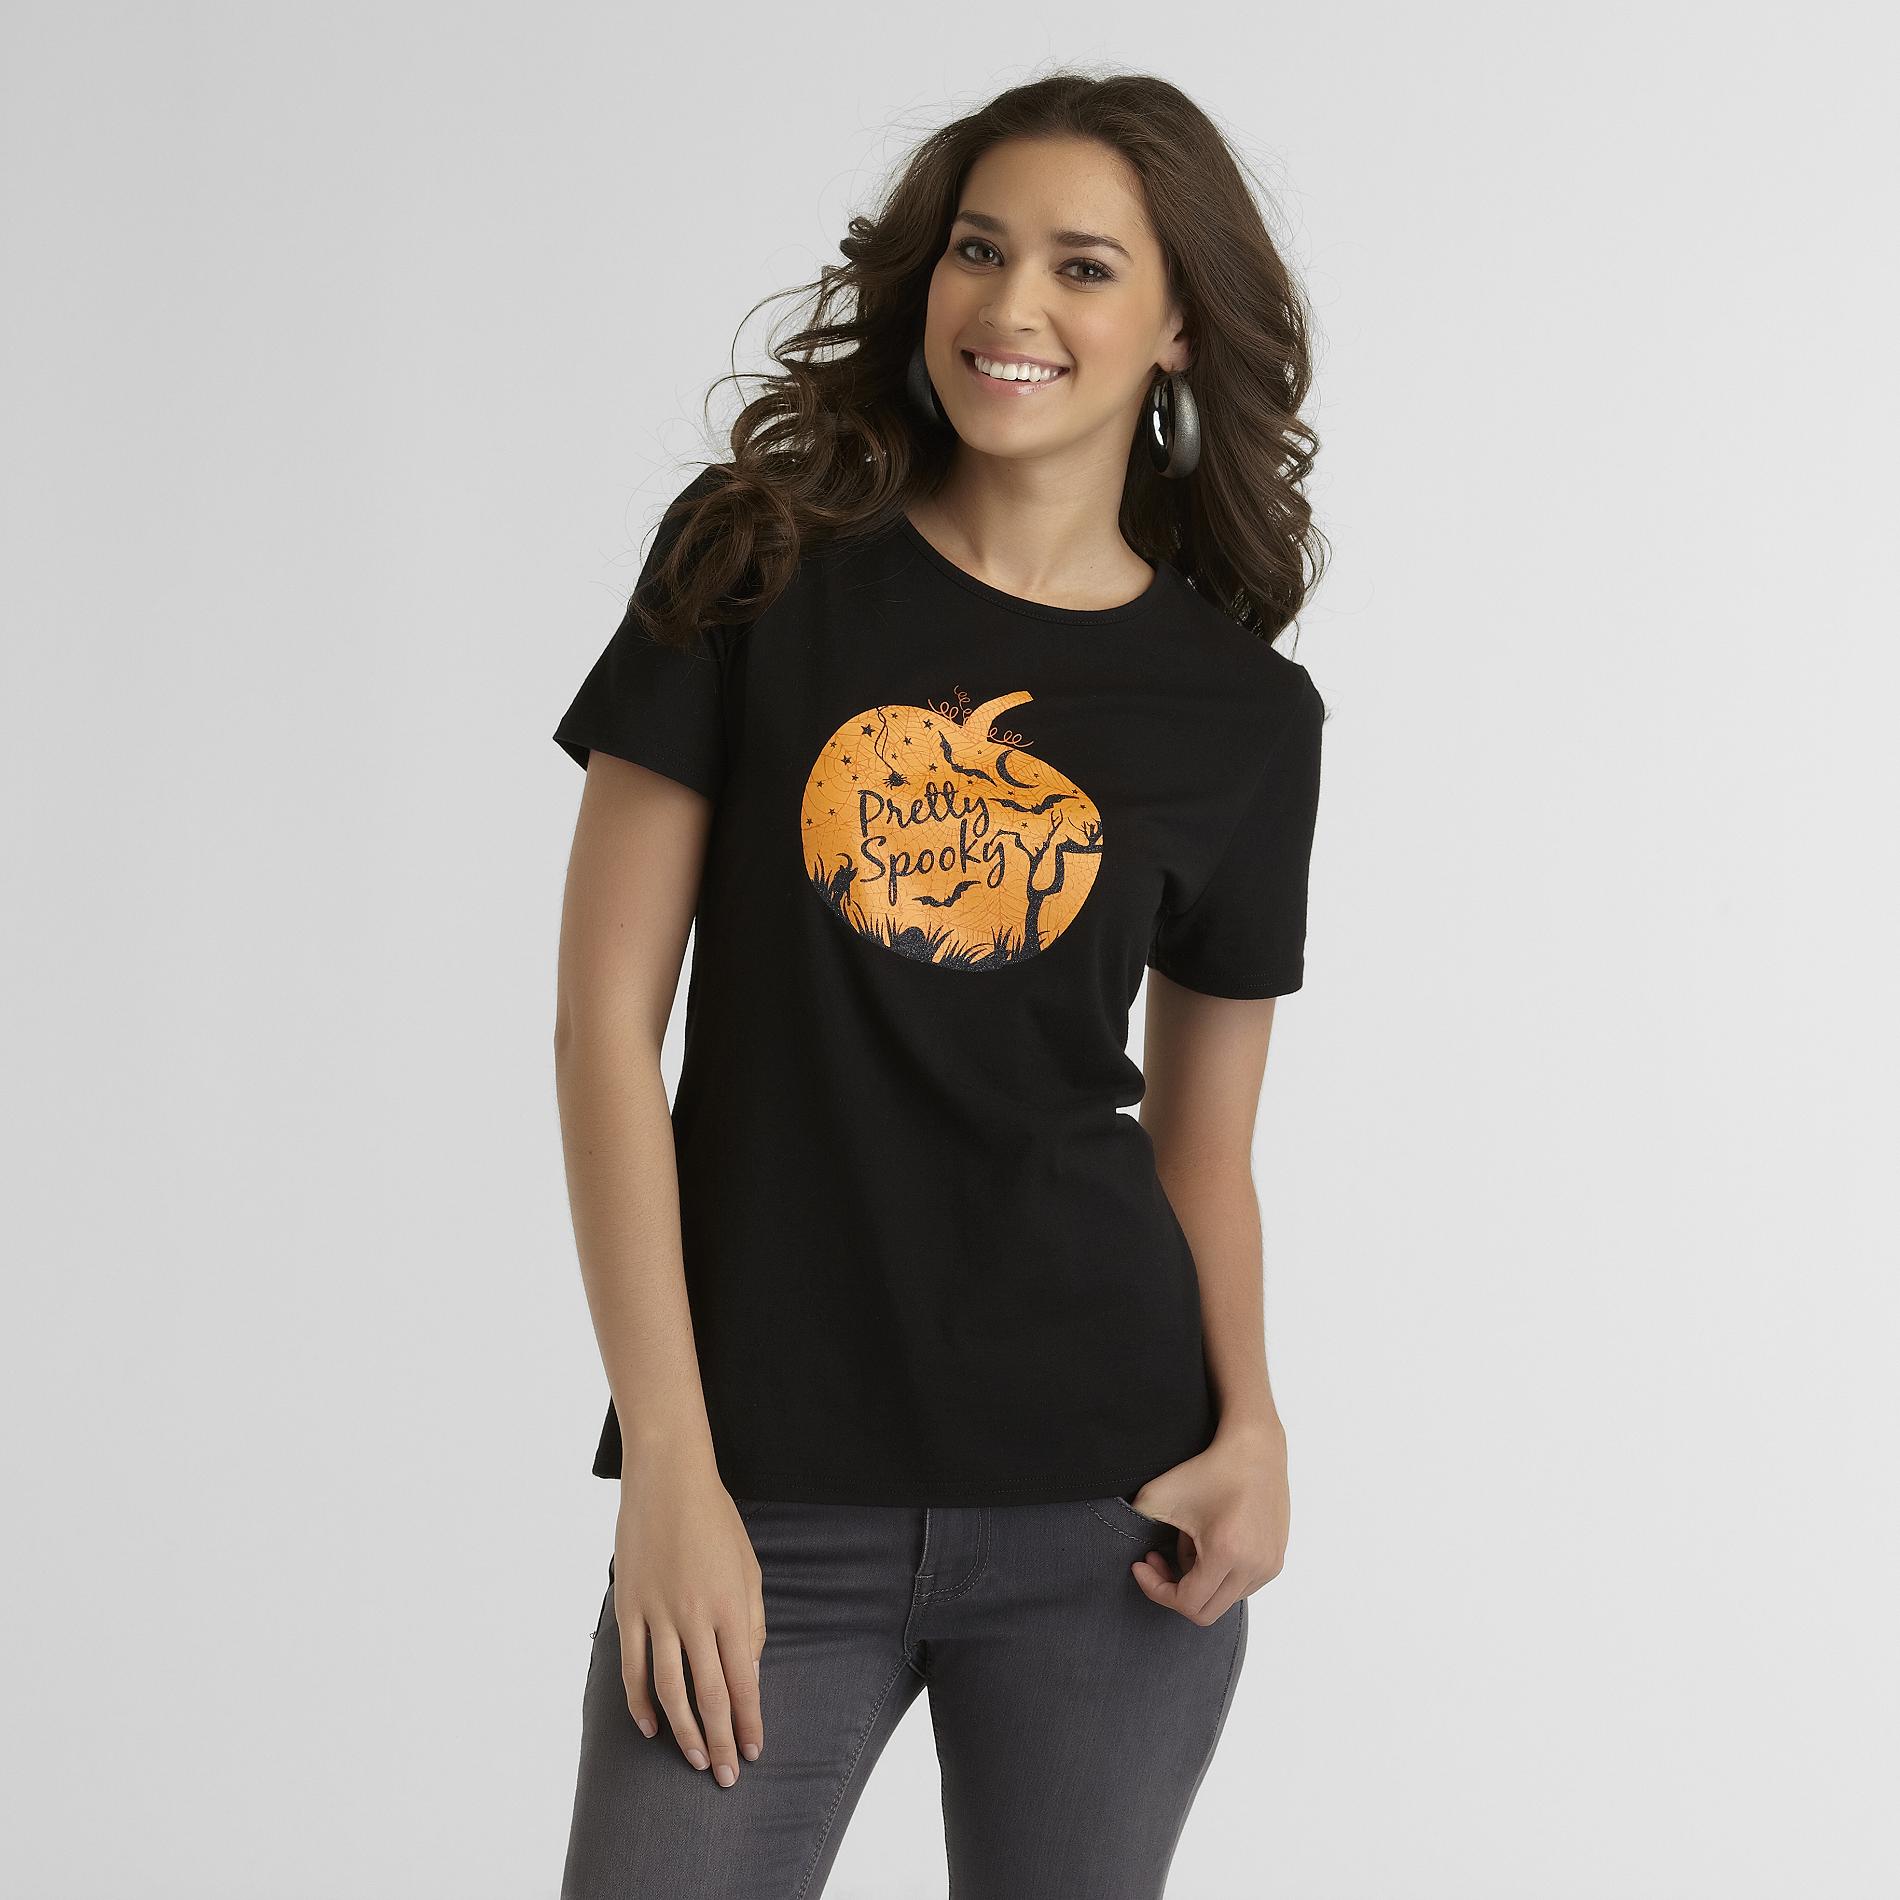 Holiday Editions Women's Halloween T-Shirt - Pretty Spooky